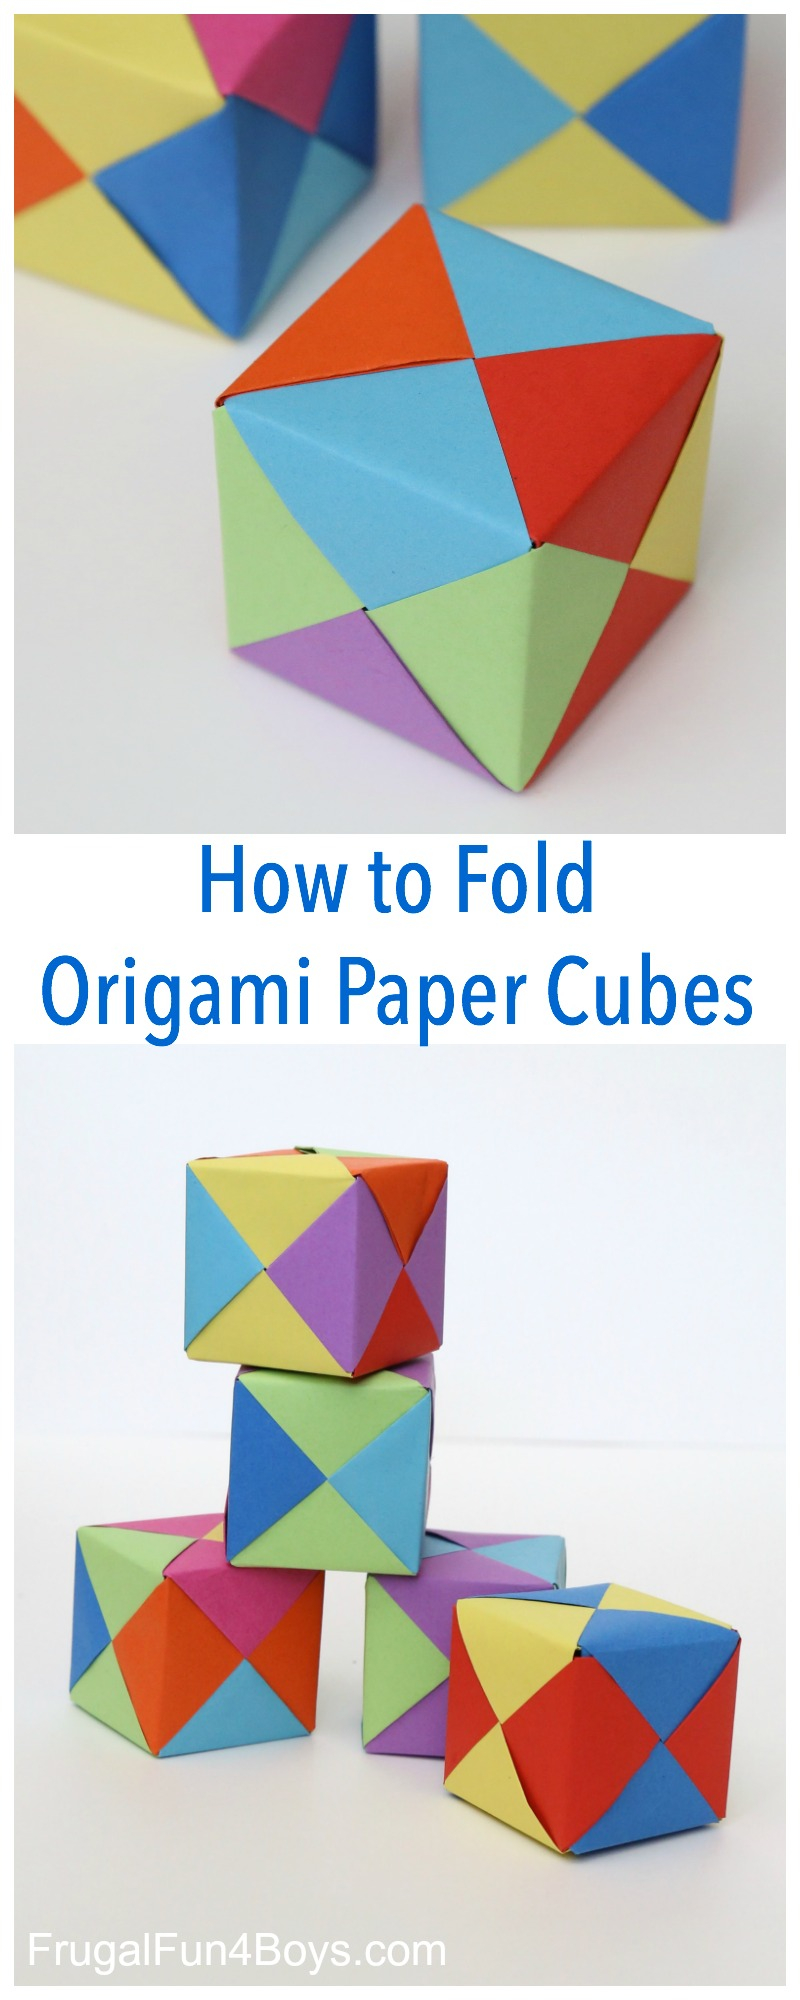 How To Make Origami Ball 27 Magic Ball Origami Paper Size